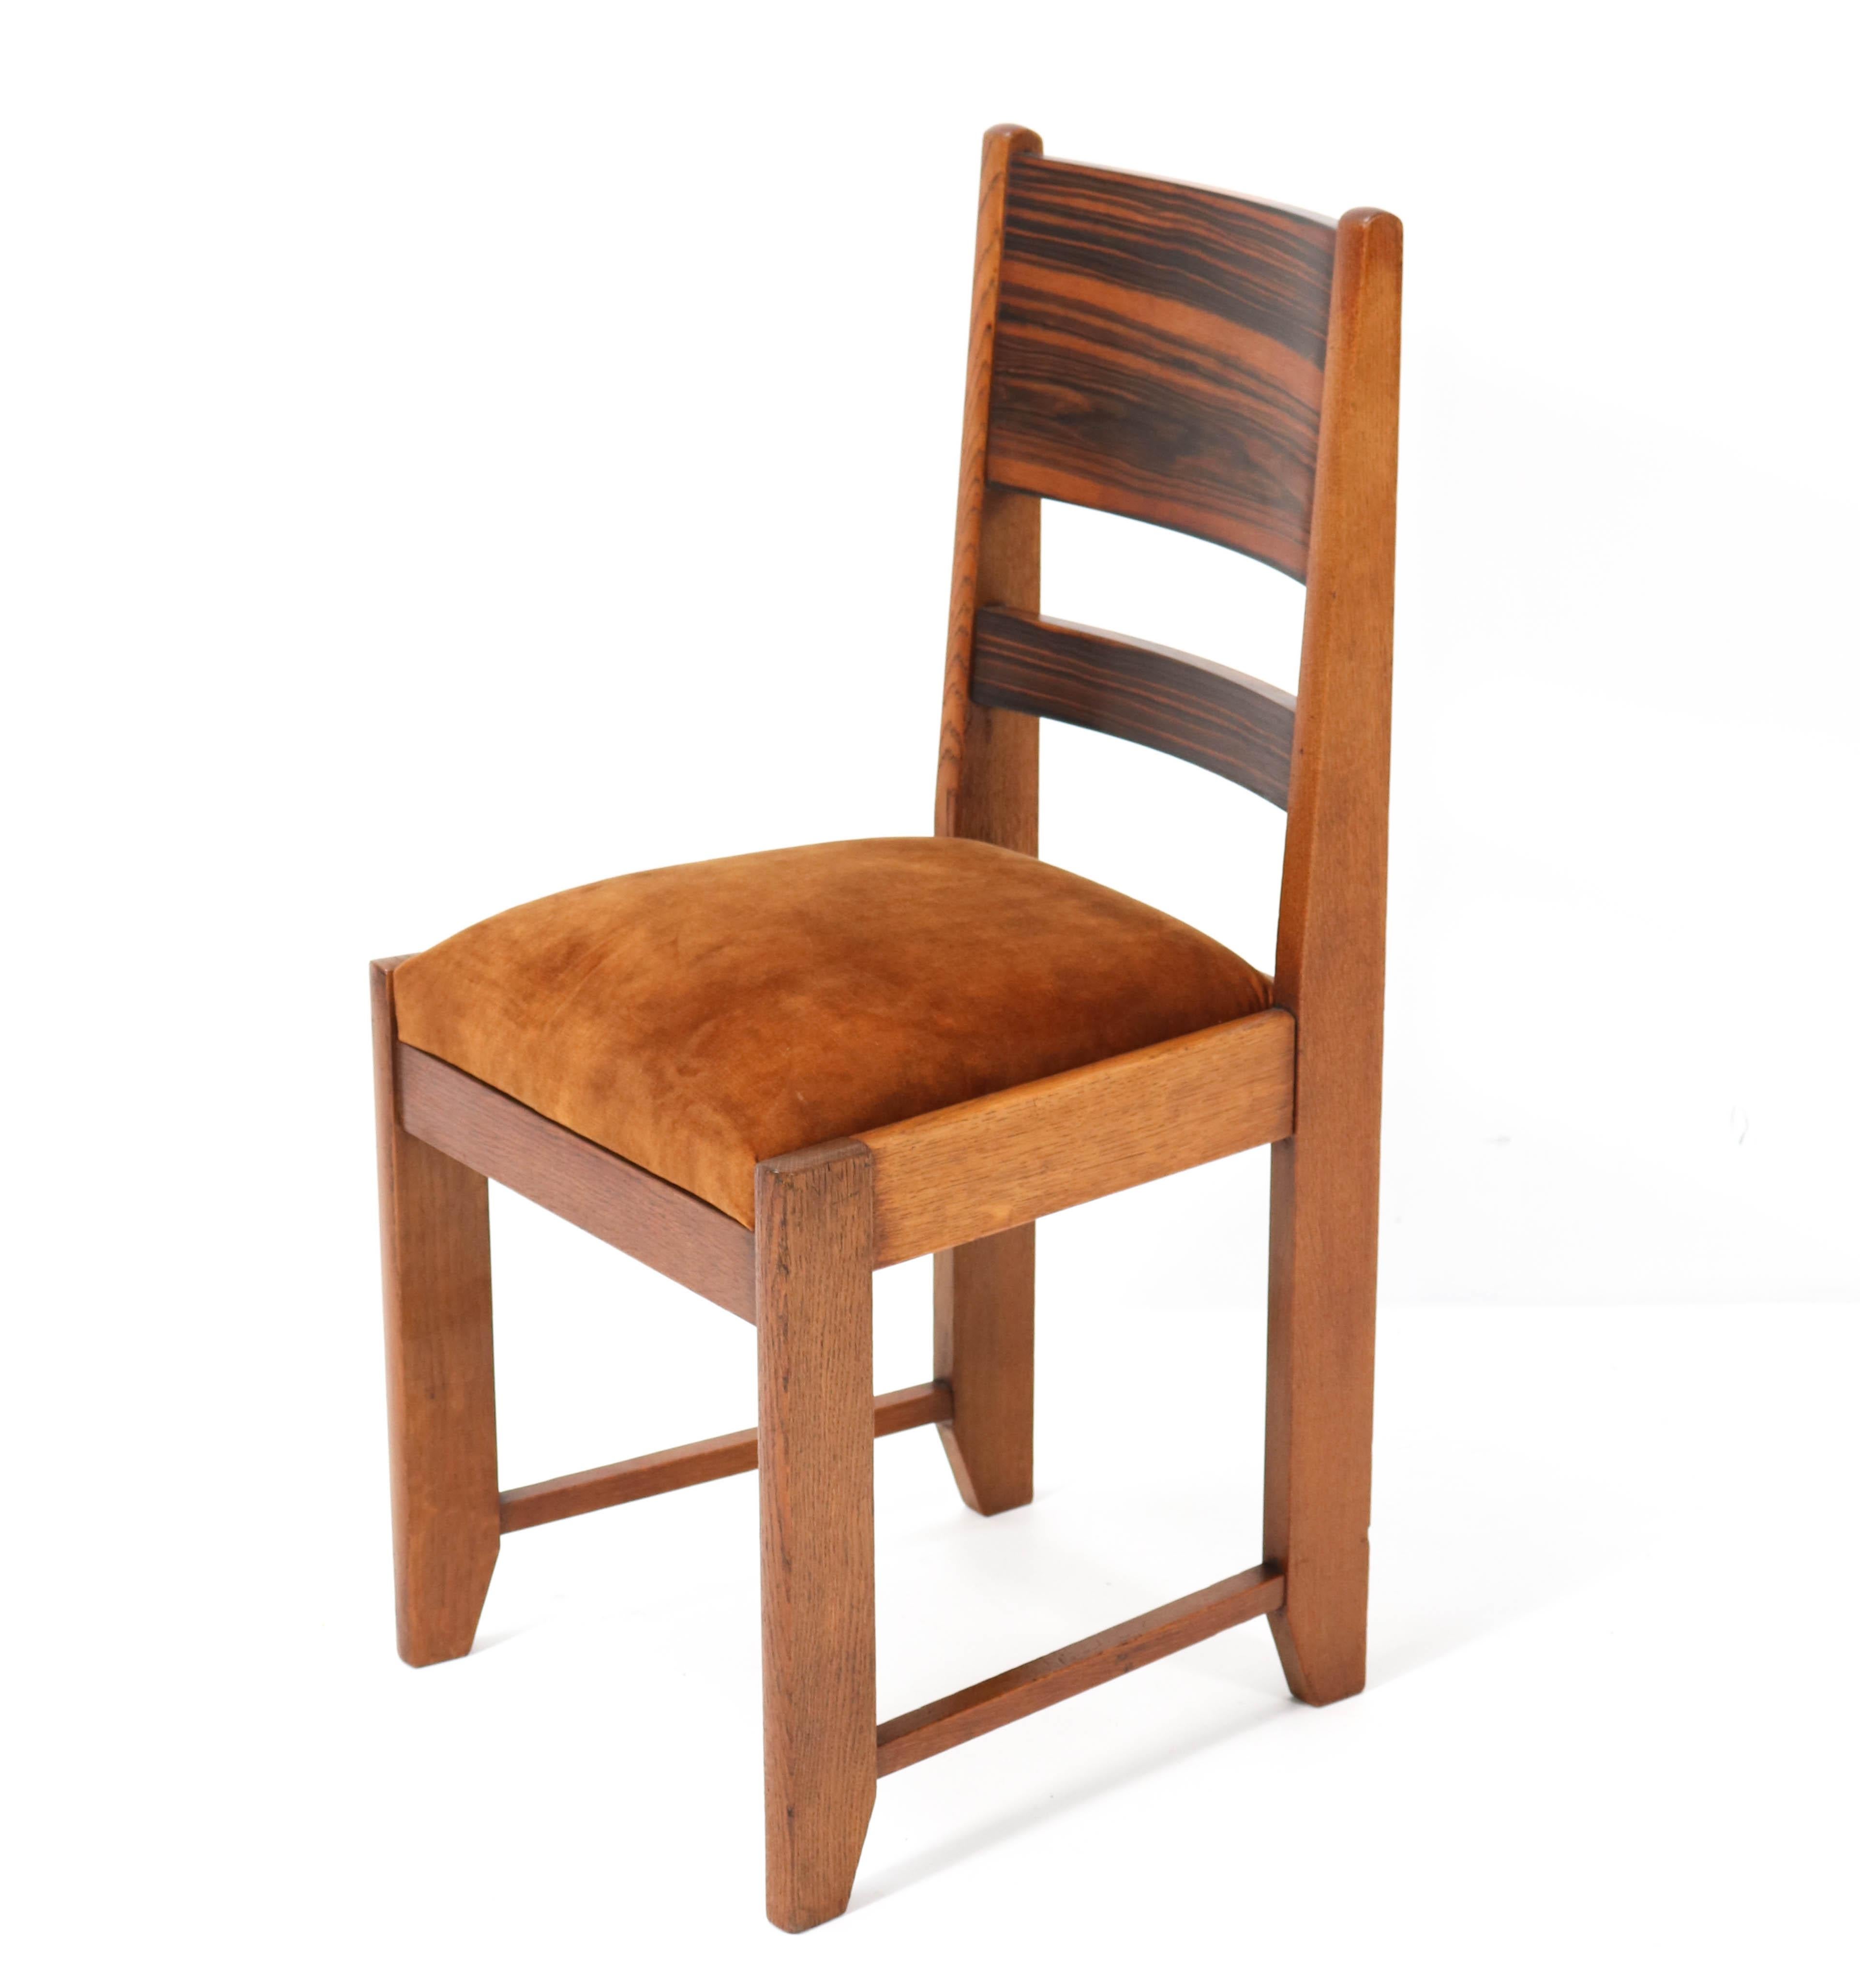 Four Oak Art Deco Haagse School Dining Room Chairs, 1920s 1